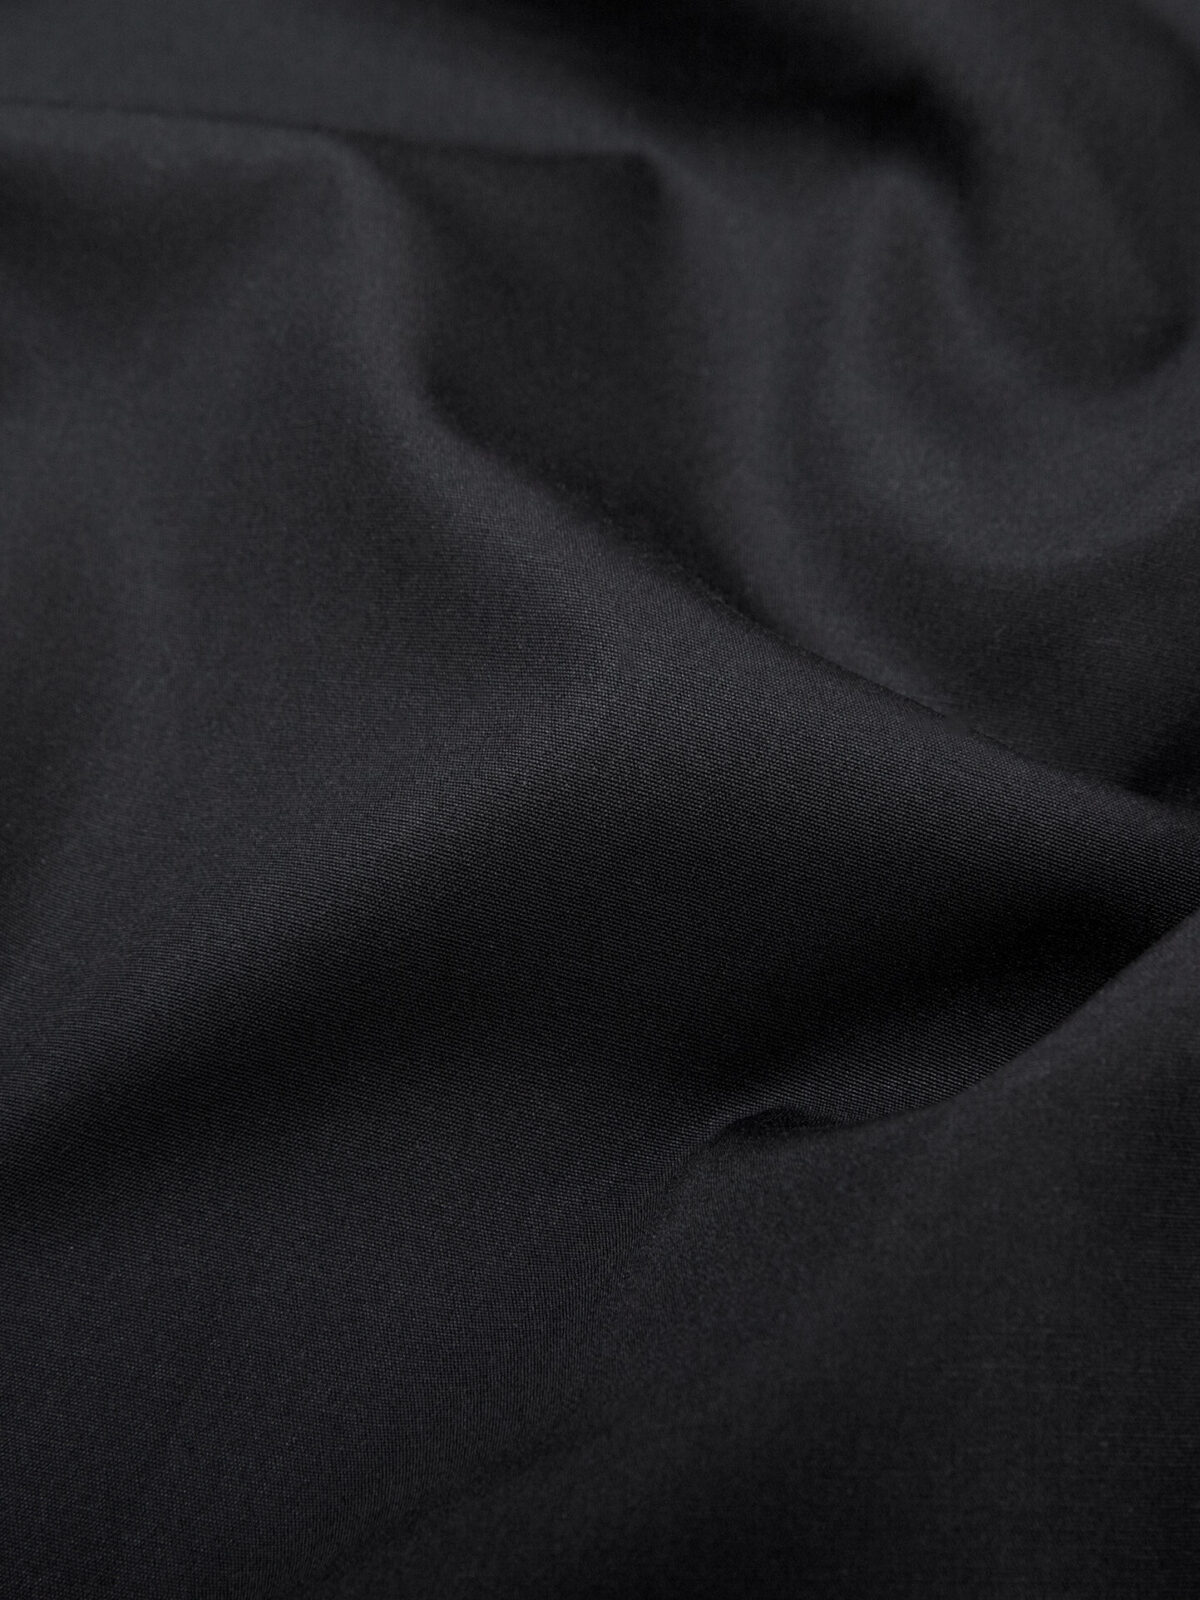 Miles 120s Black Broadcloth Shirts by Proper Cloth